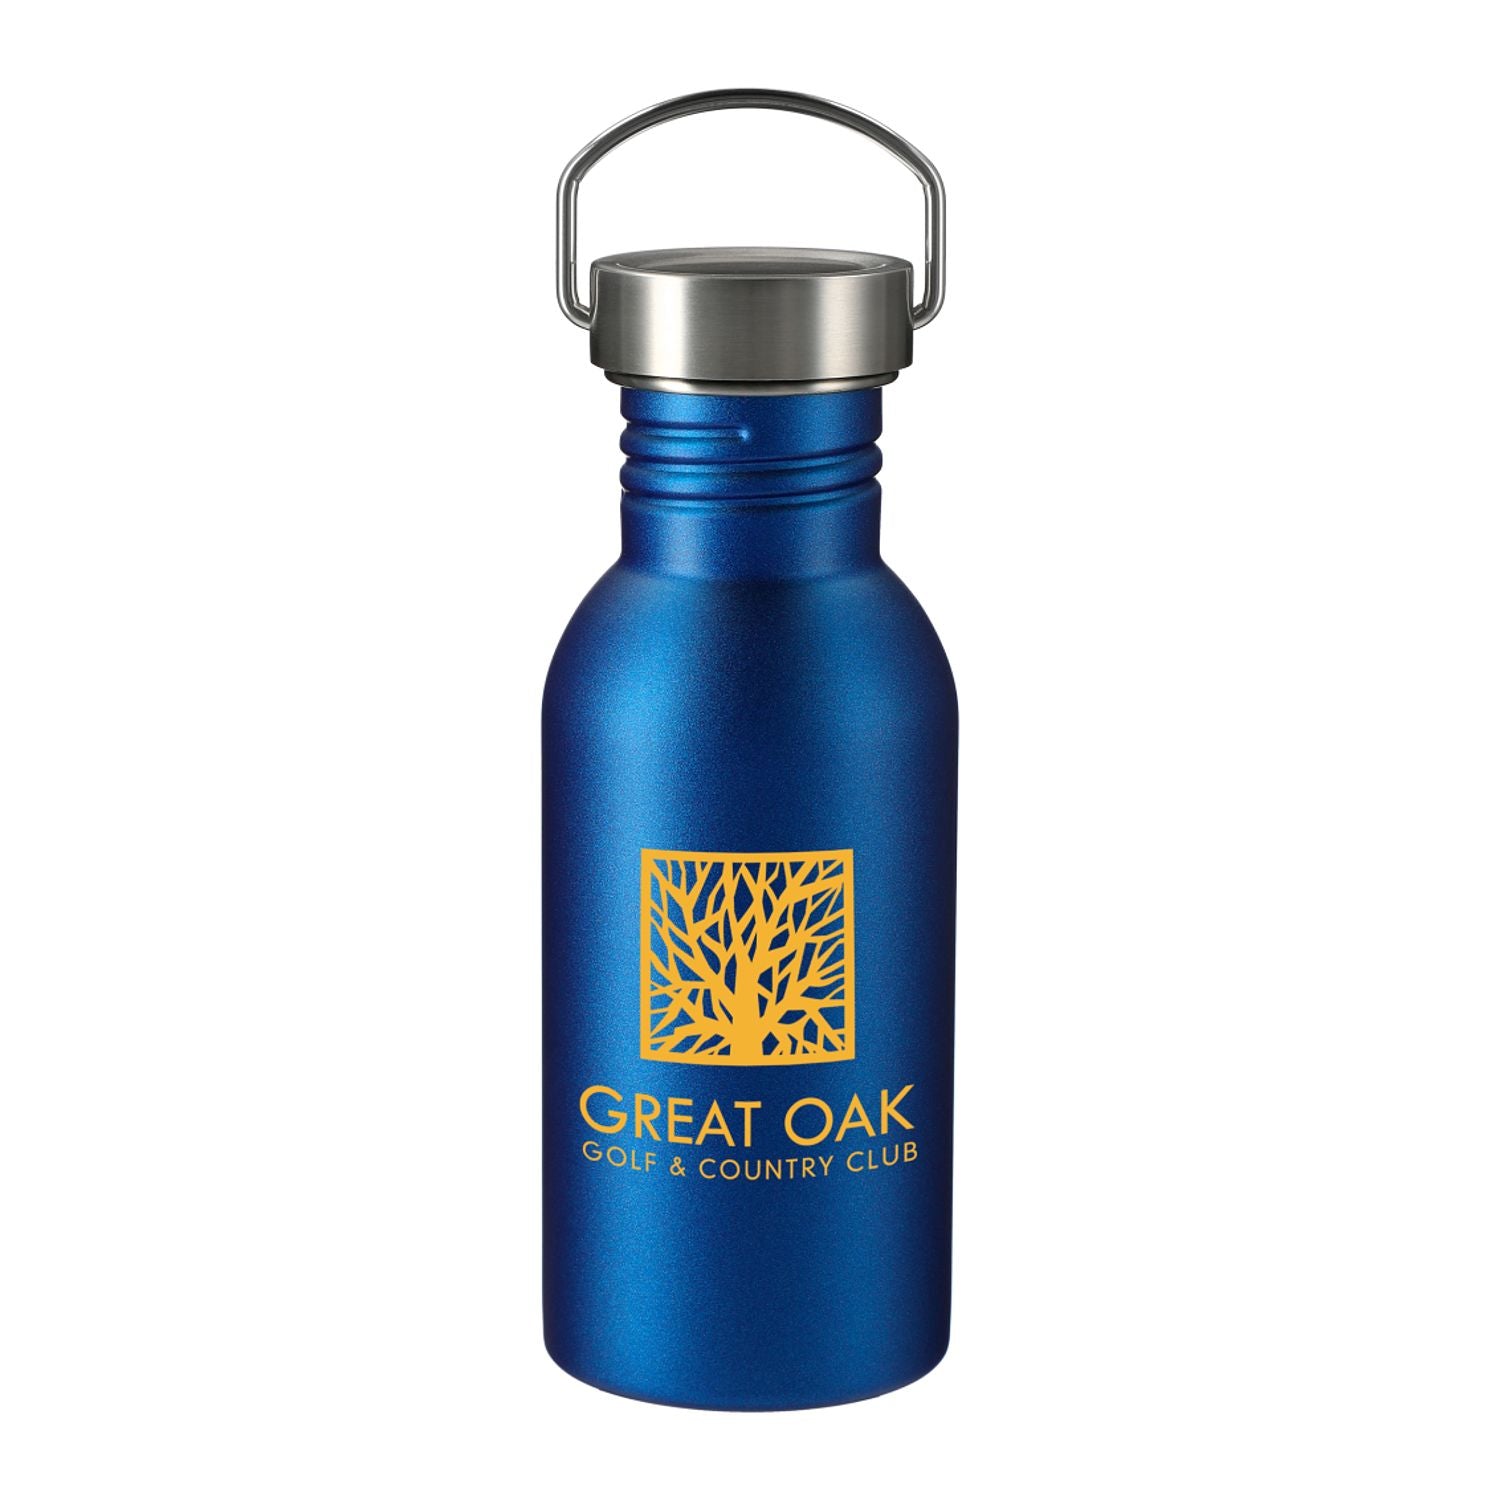 Thor 20 oz Stainless Steel Single-Walled Sports Bottle in blue